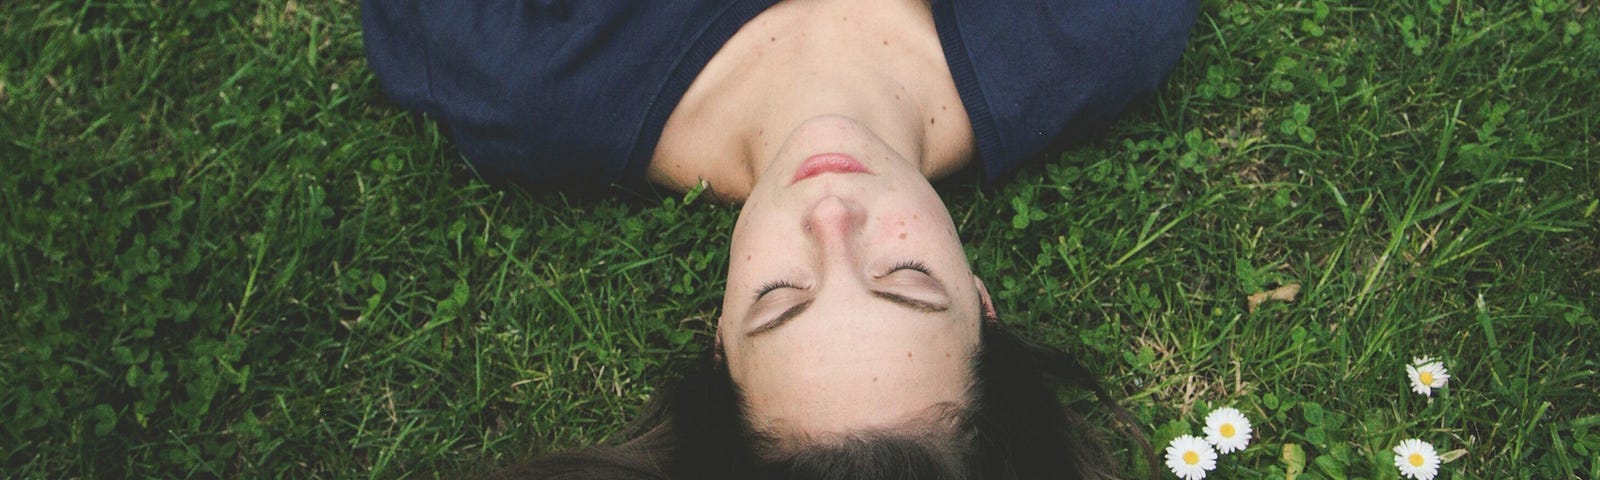 Young white woman in blue shirt looking calm with eyes closed, laying on her back in the grass